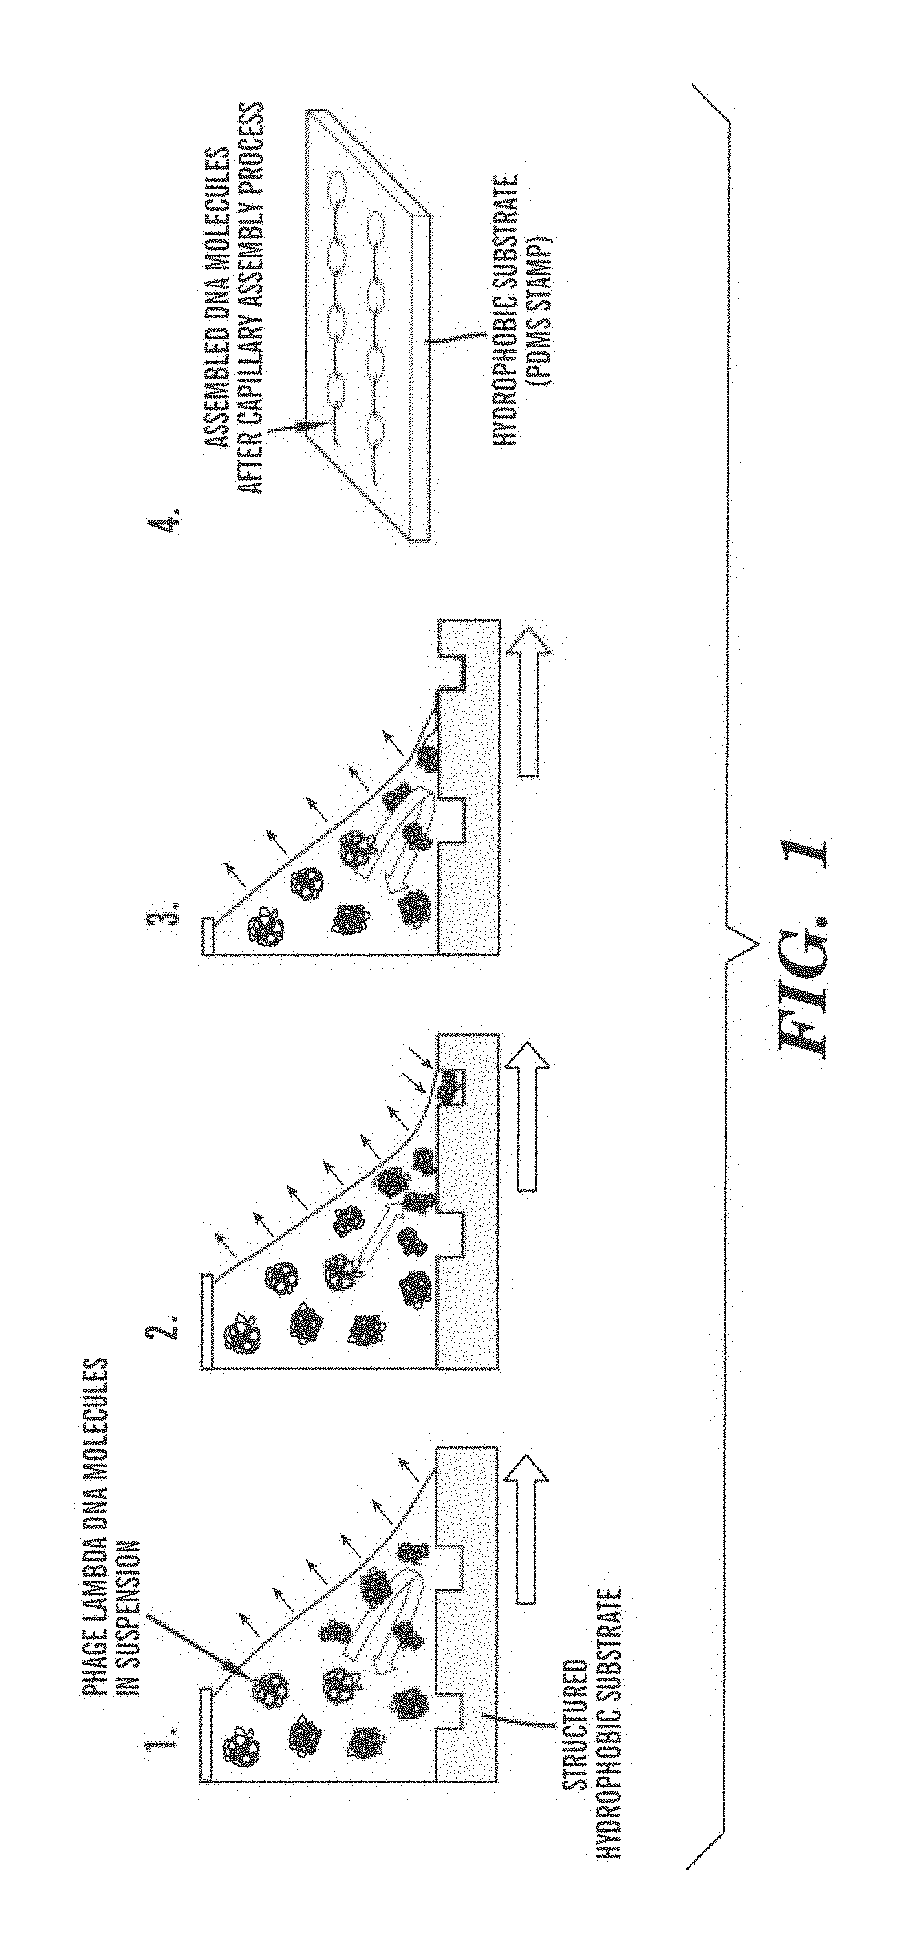 Methods and arrays for controlled manipulation of DNA and chromatin fragments for genetic and epigenetic analysis